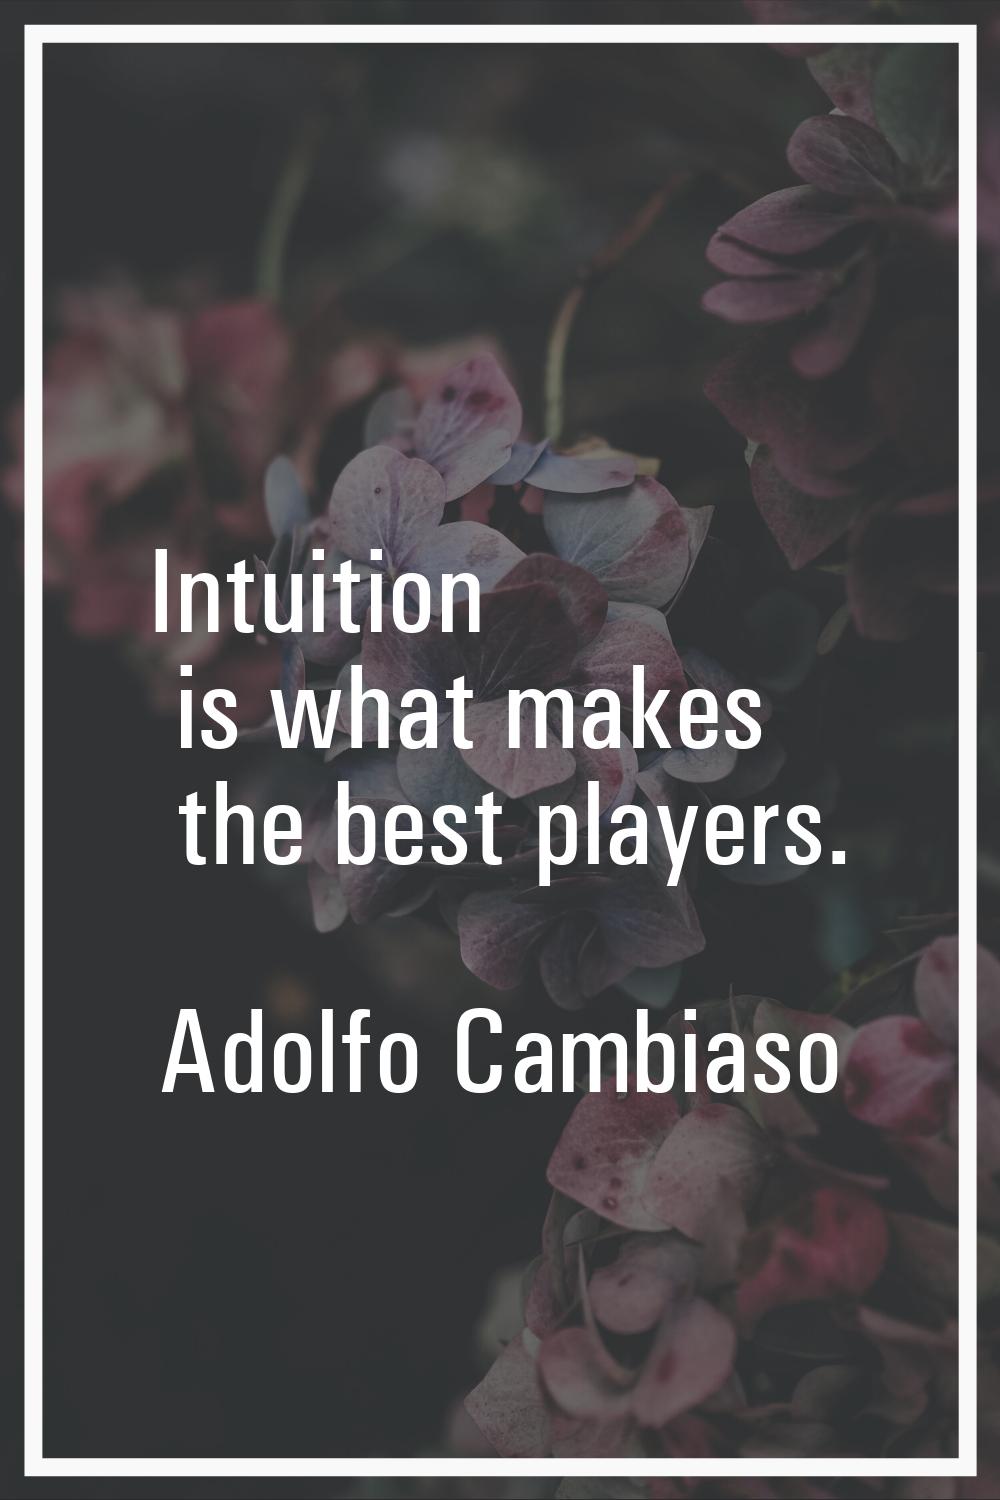 Intuition is what makes the best players.